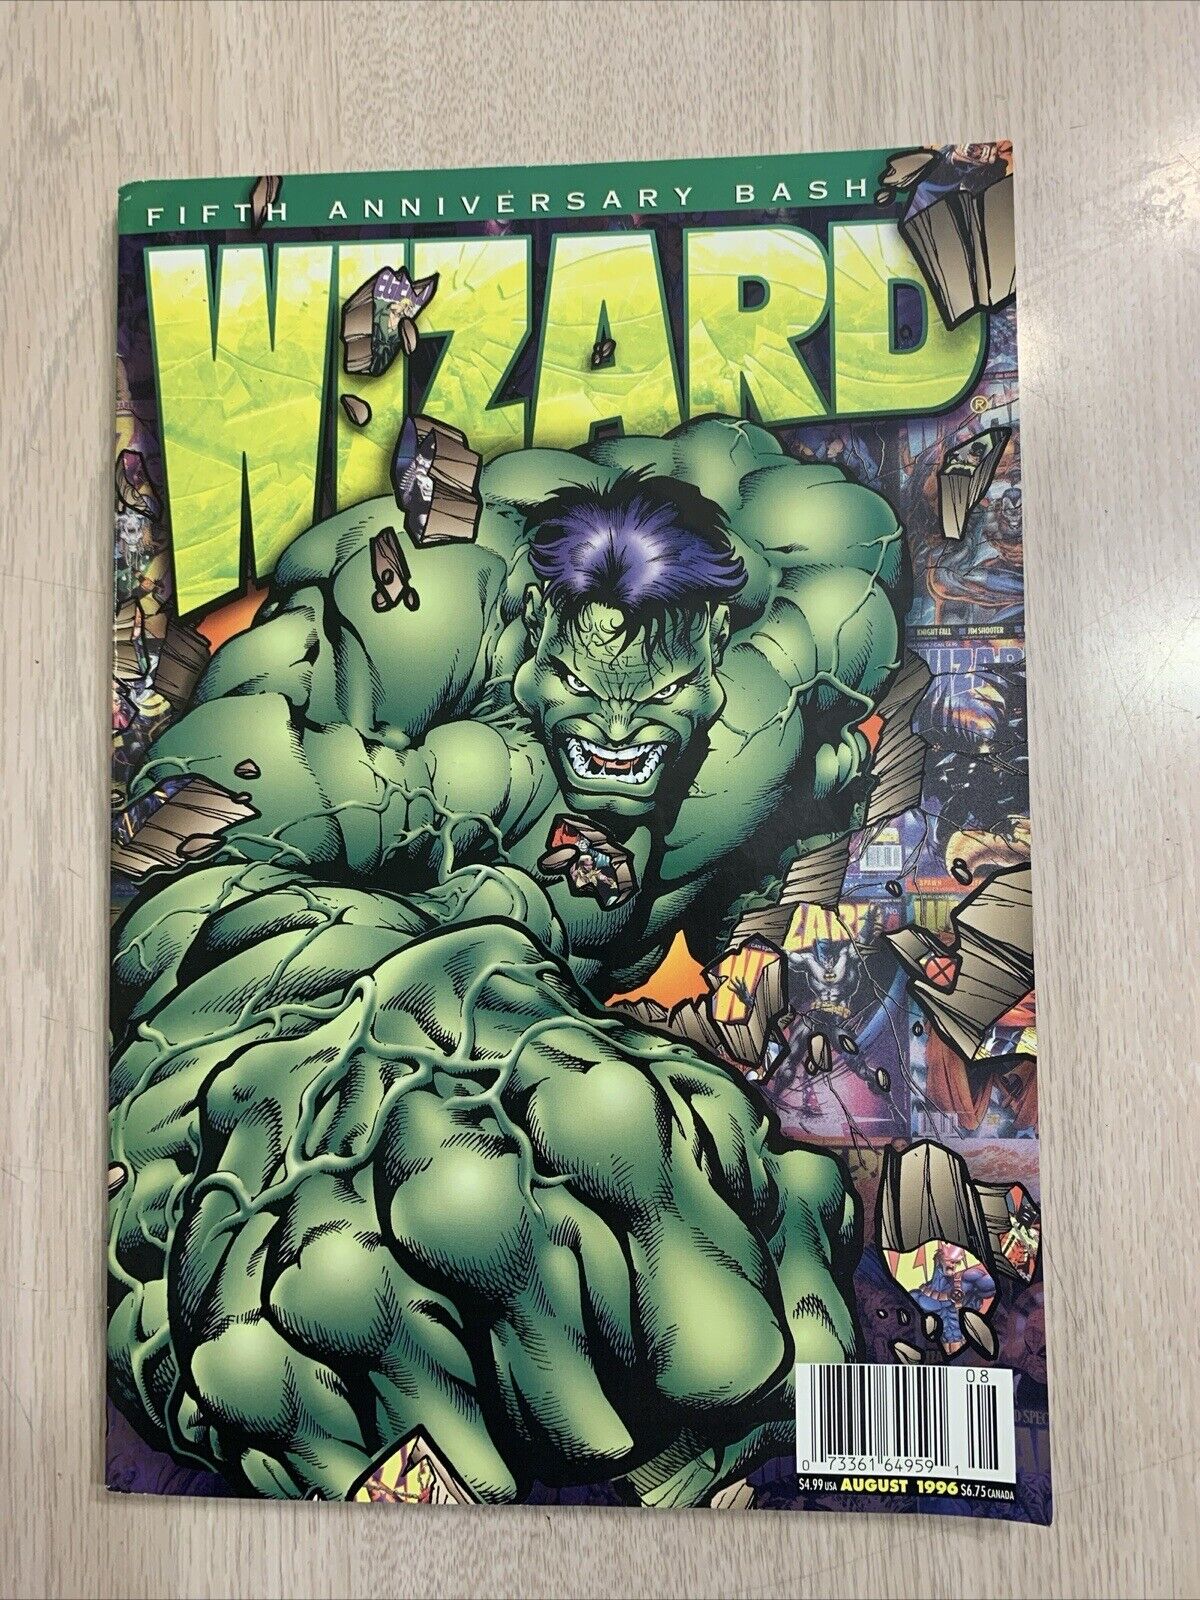 WIZARD MAGAZINE 60 1996 AUGUST 5TH ANNIVERSARY BASH 246 PAGES GUIDE TO COMICS